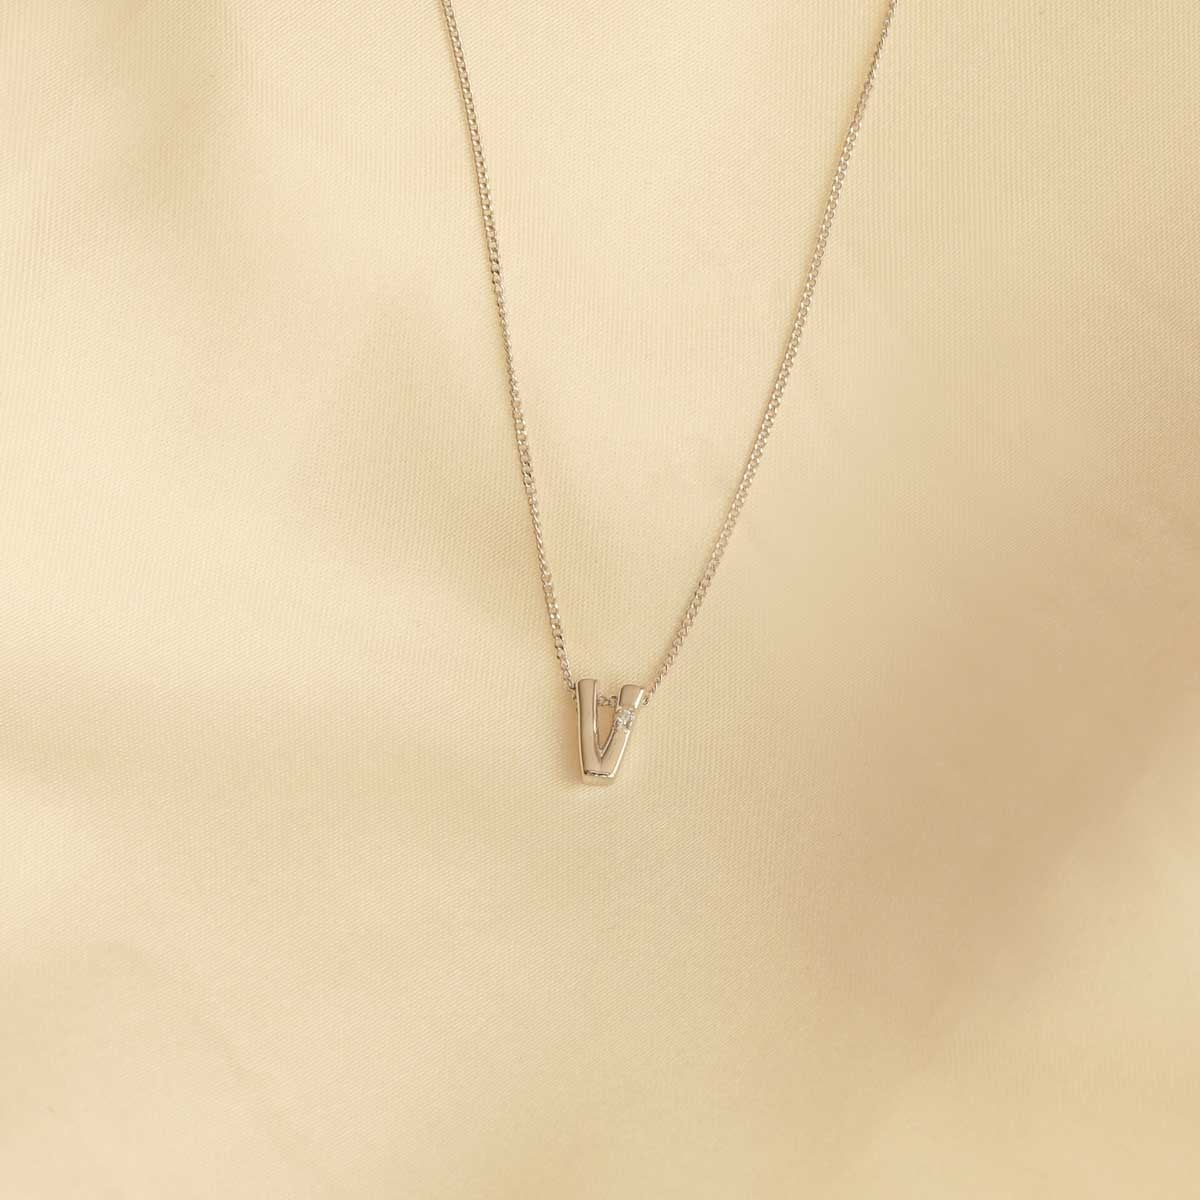 Flat lay shot of V Initial Pendant Necklace in Silver